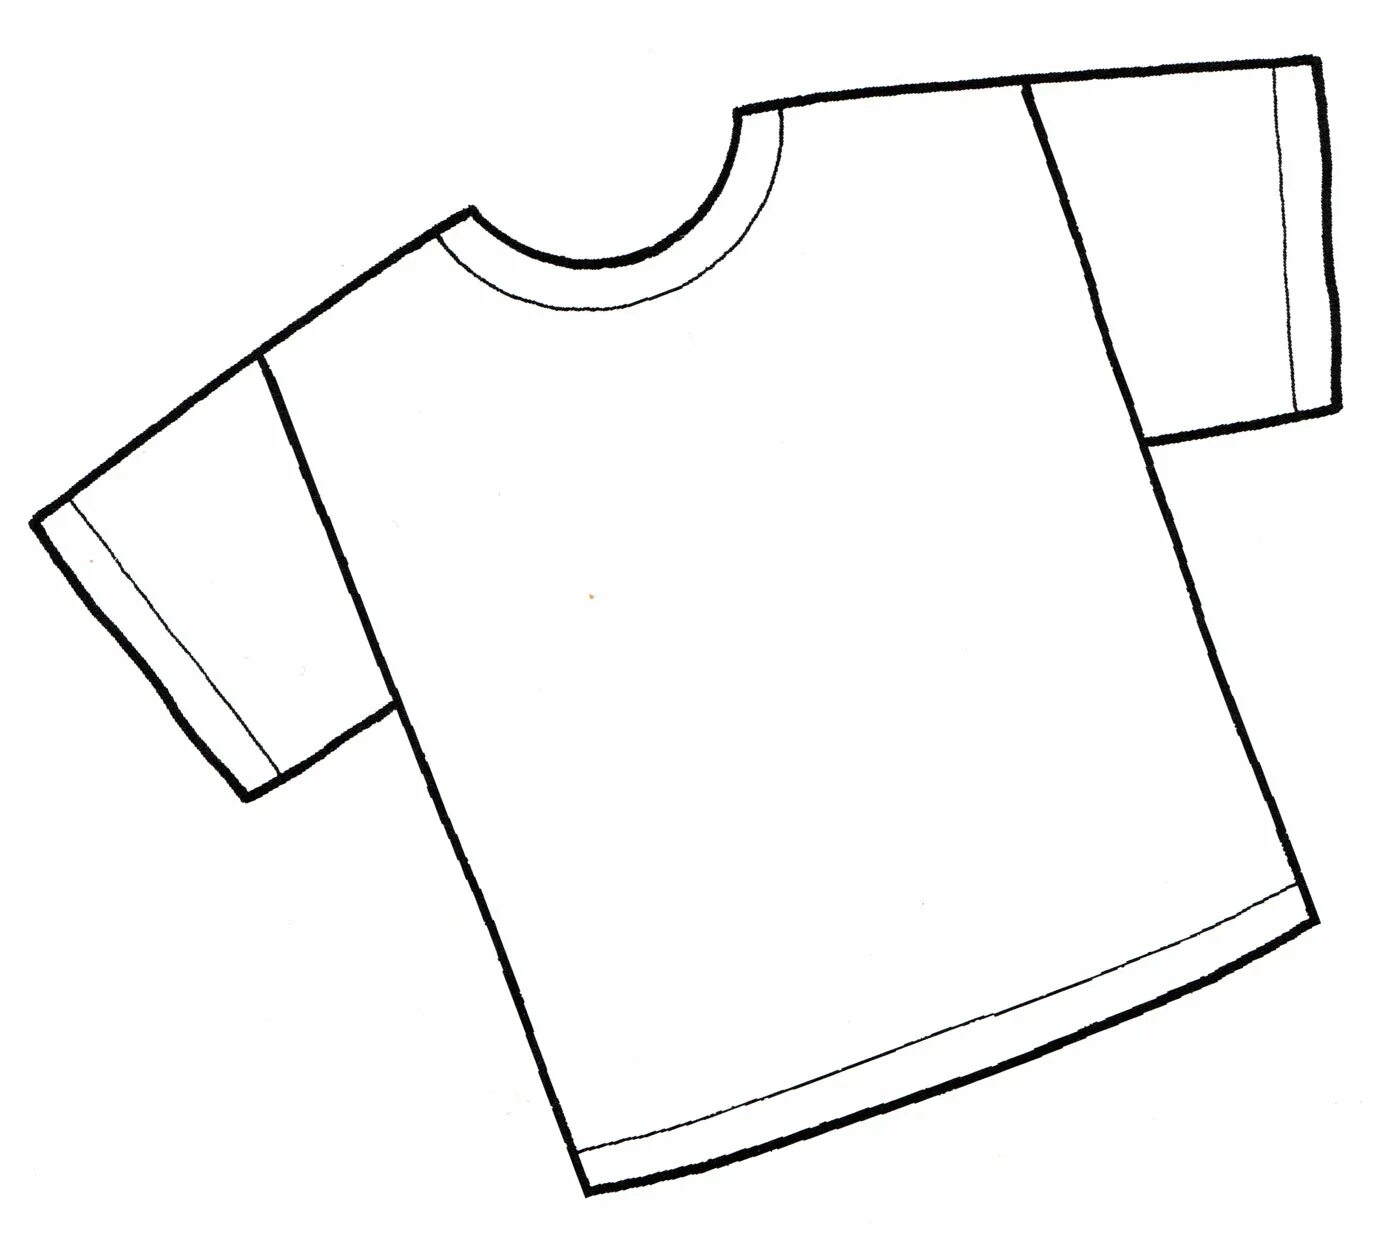 T-shirt coloring to develop patience in children